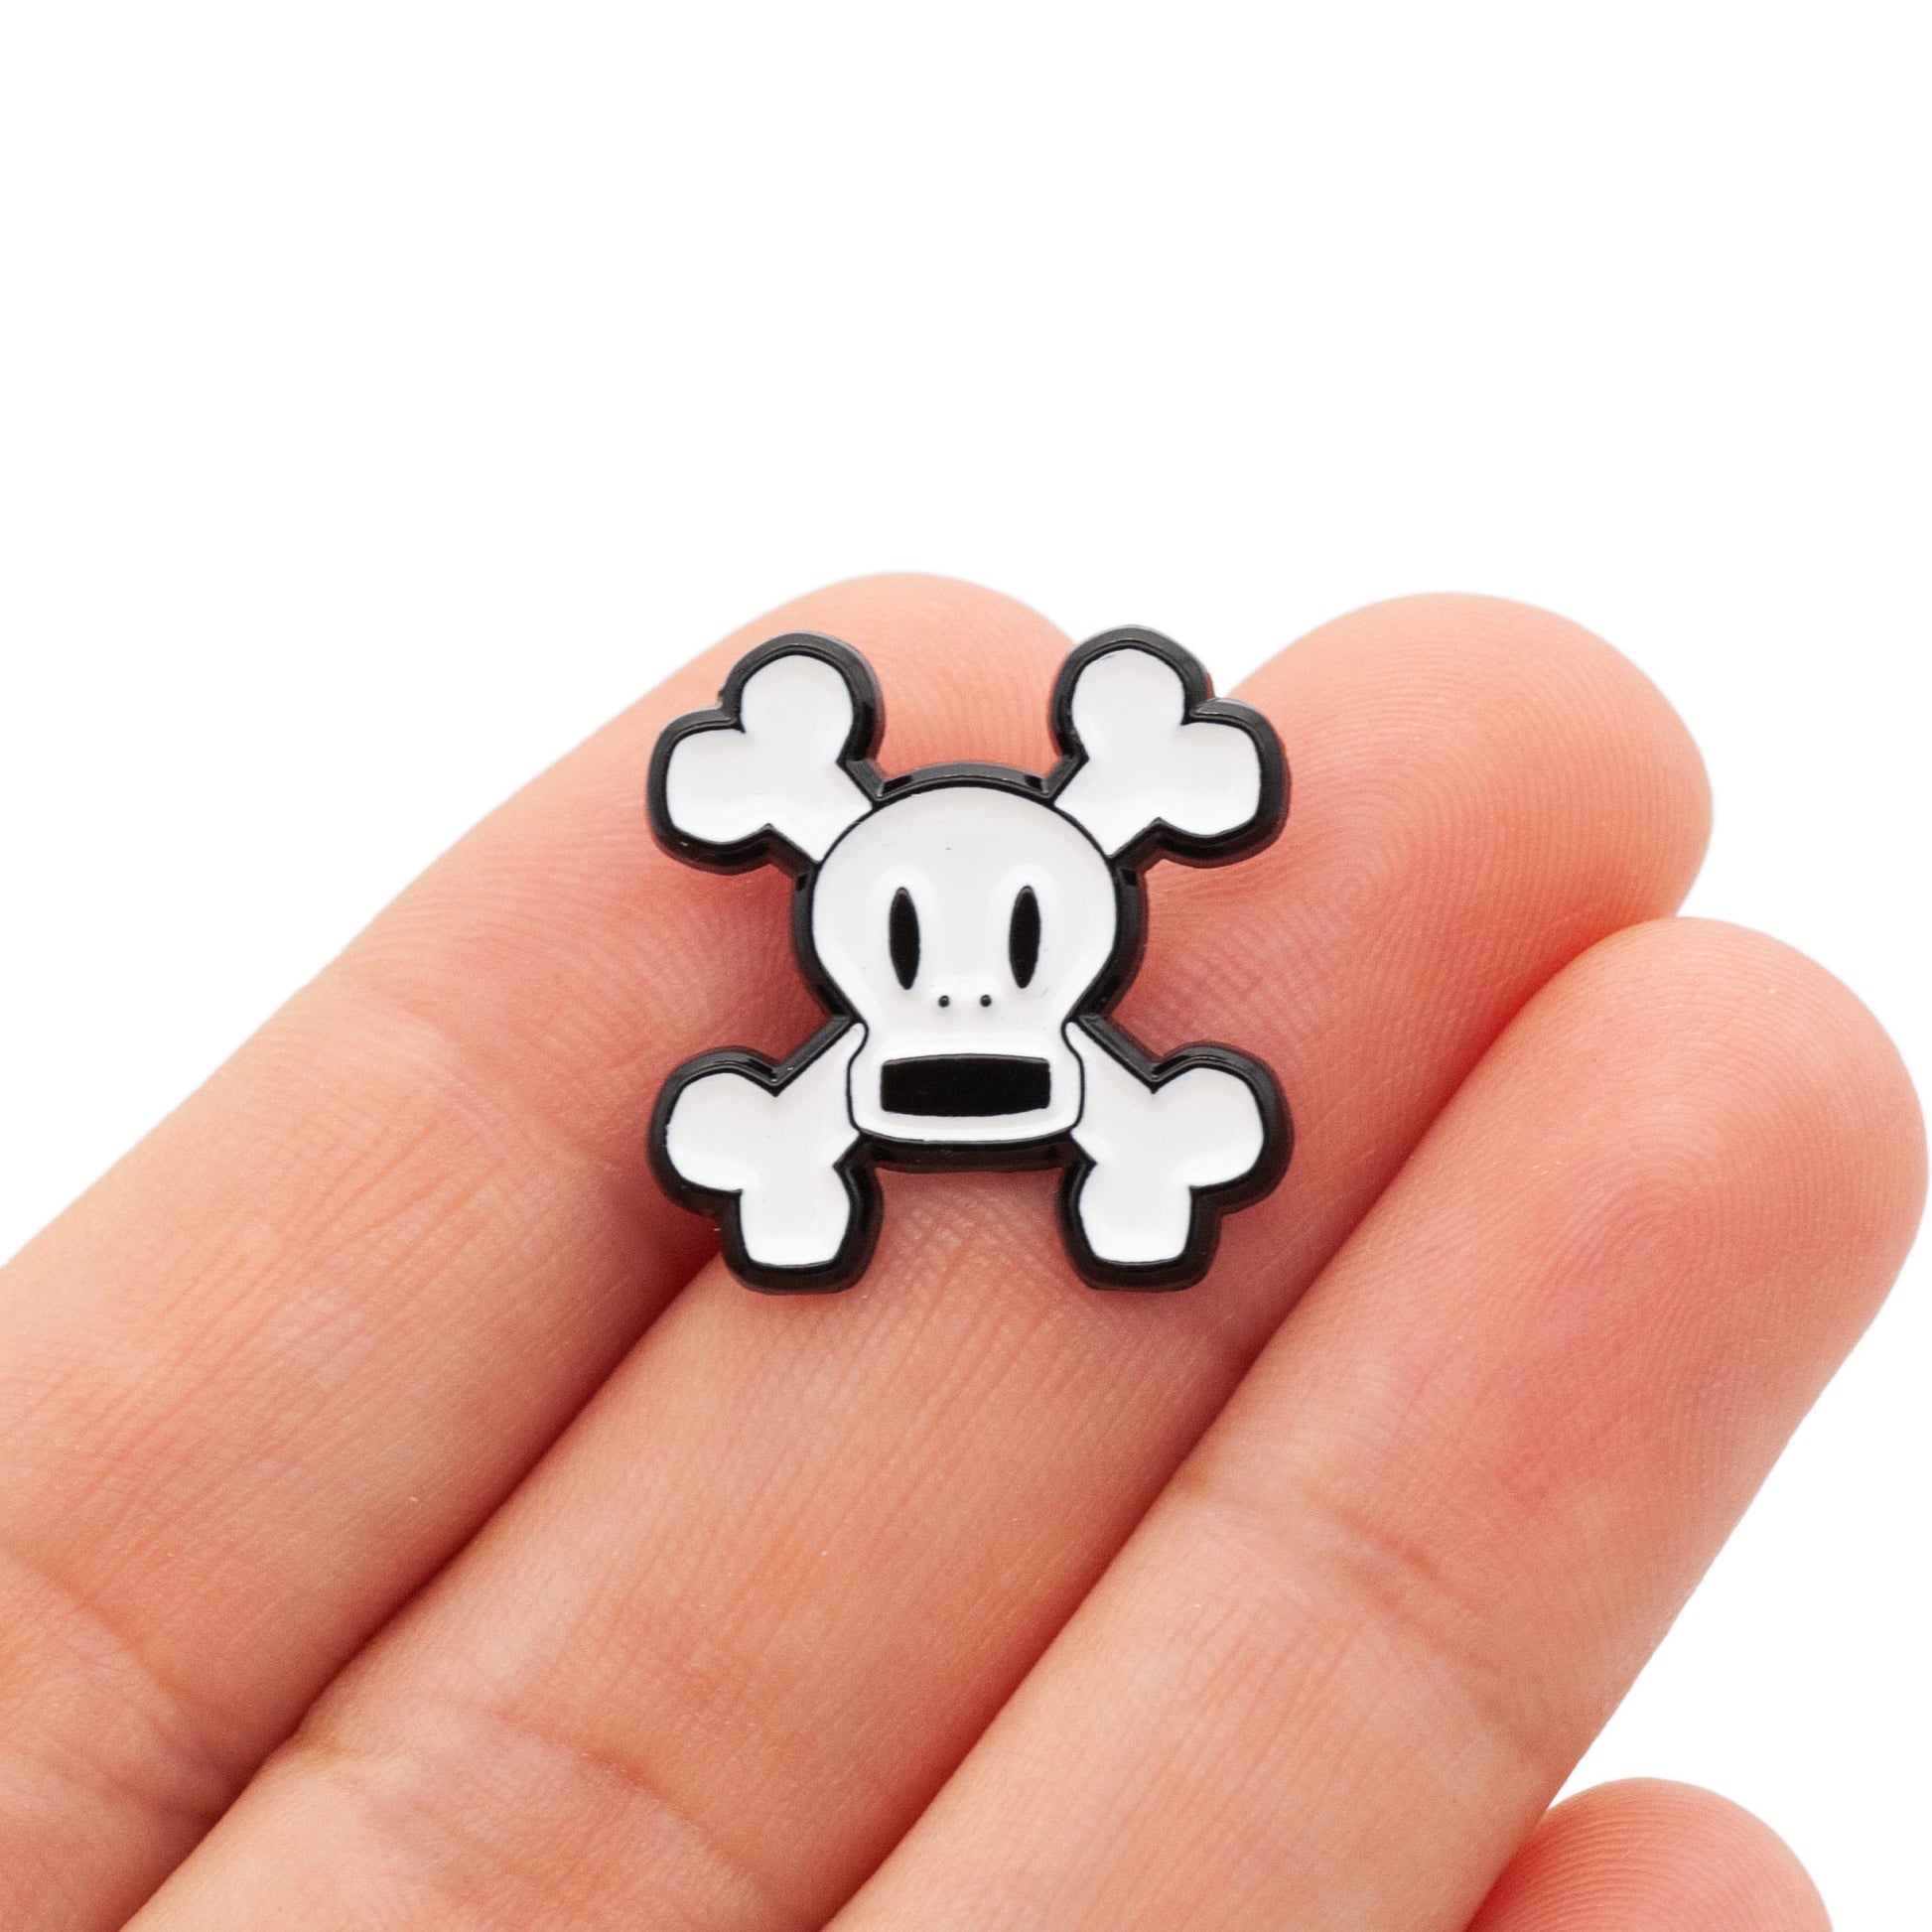 Skurvy is a soft enamel pin of white crossbones with an open mouth. shot being held by a hand over a white background.